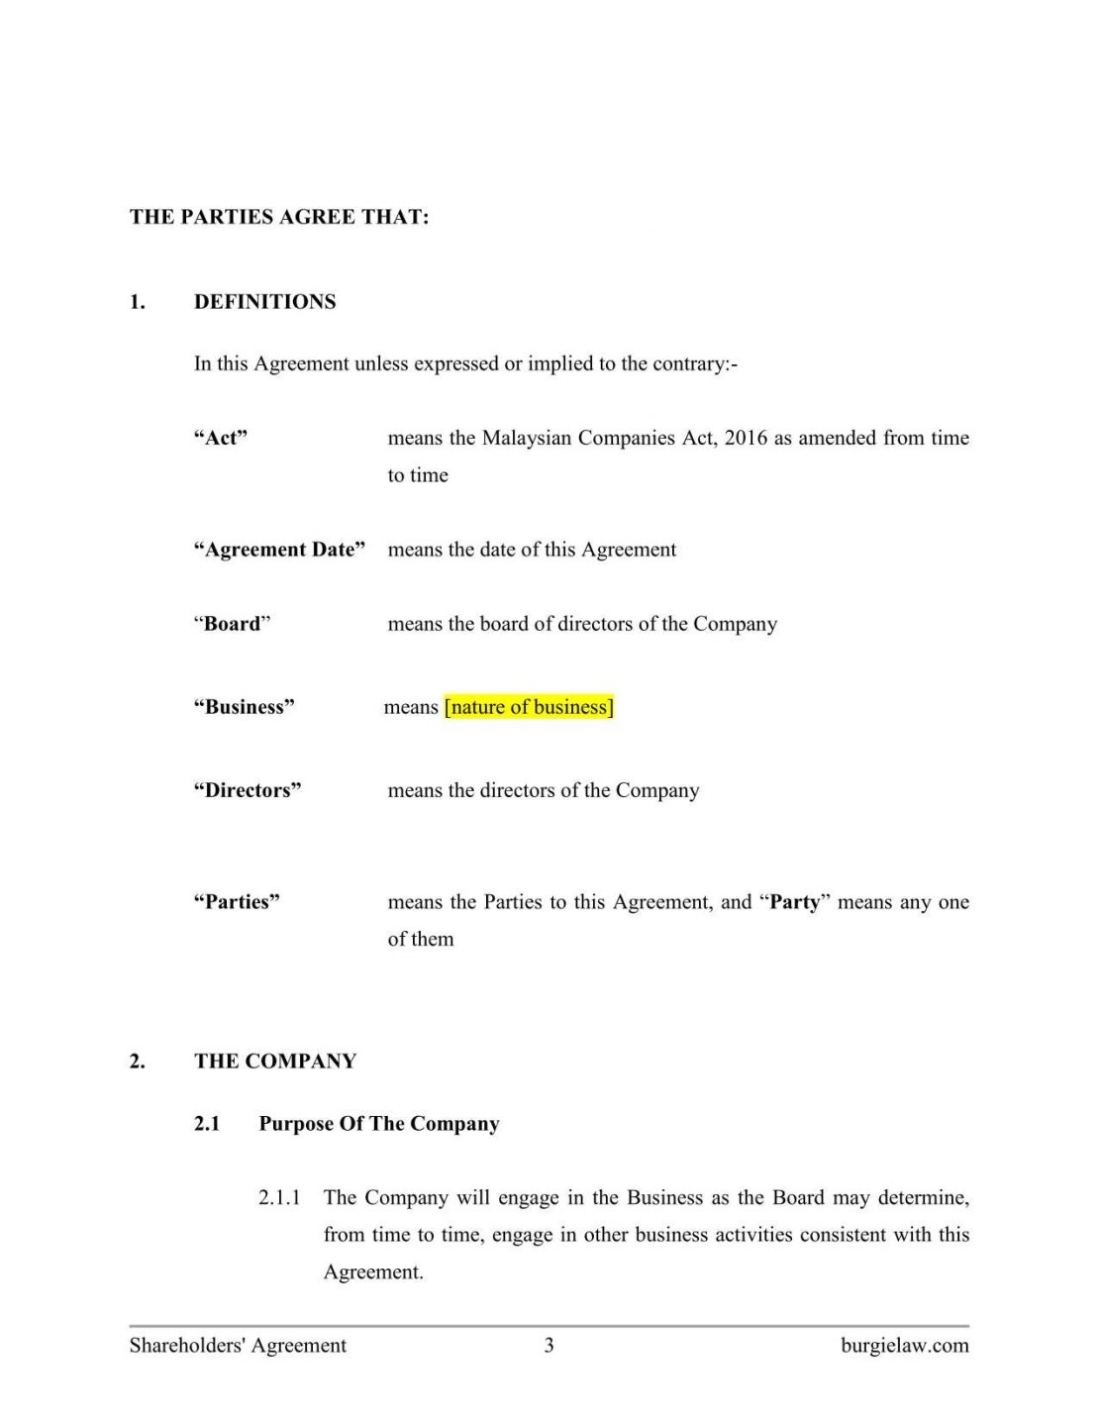 Shareholders' Agreement Template – Burgielaw With Regard To Founders Shareholder Agreement Template